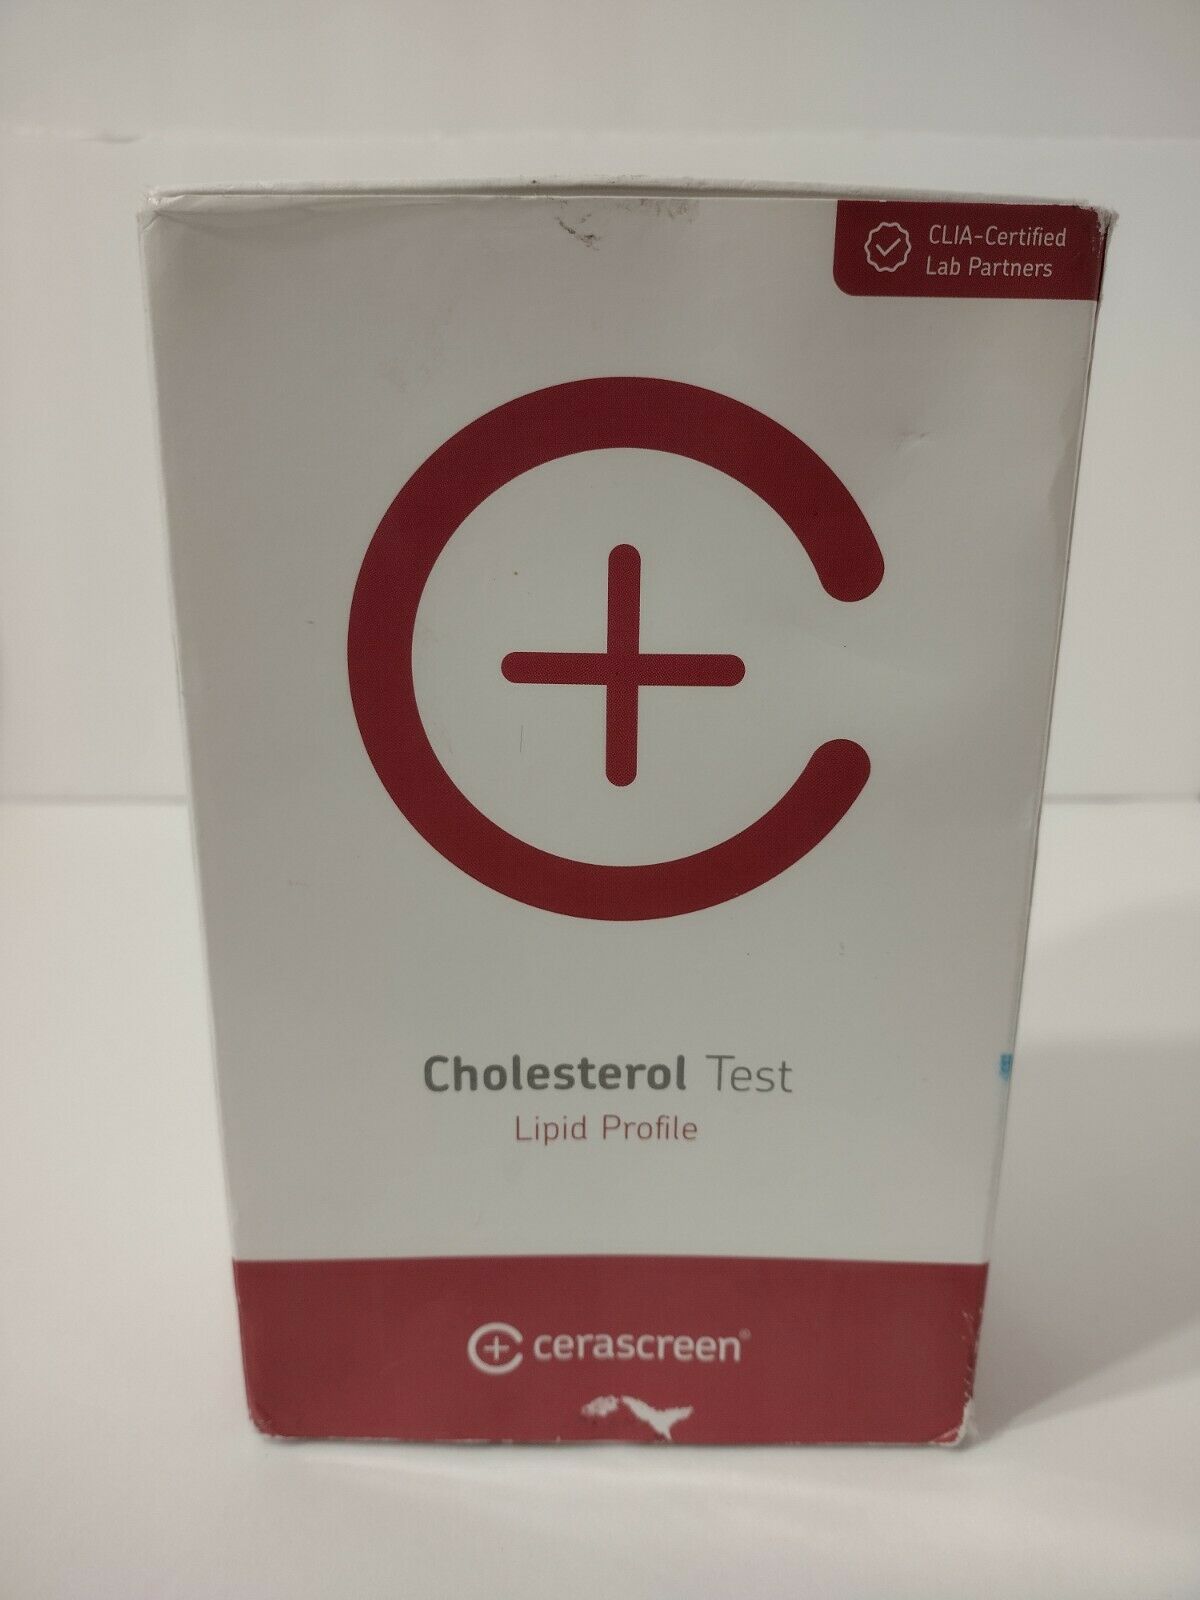 New Cerascreen Cholesterol Test & Results Kit Lipid Profile Free Shipping